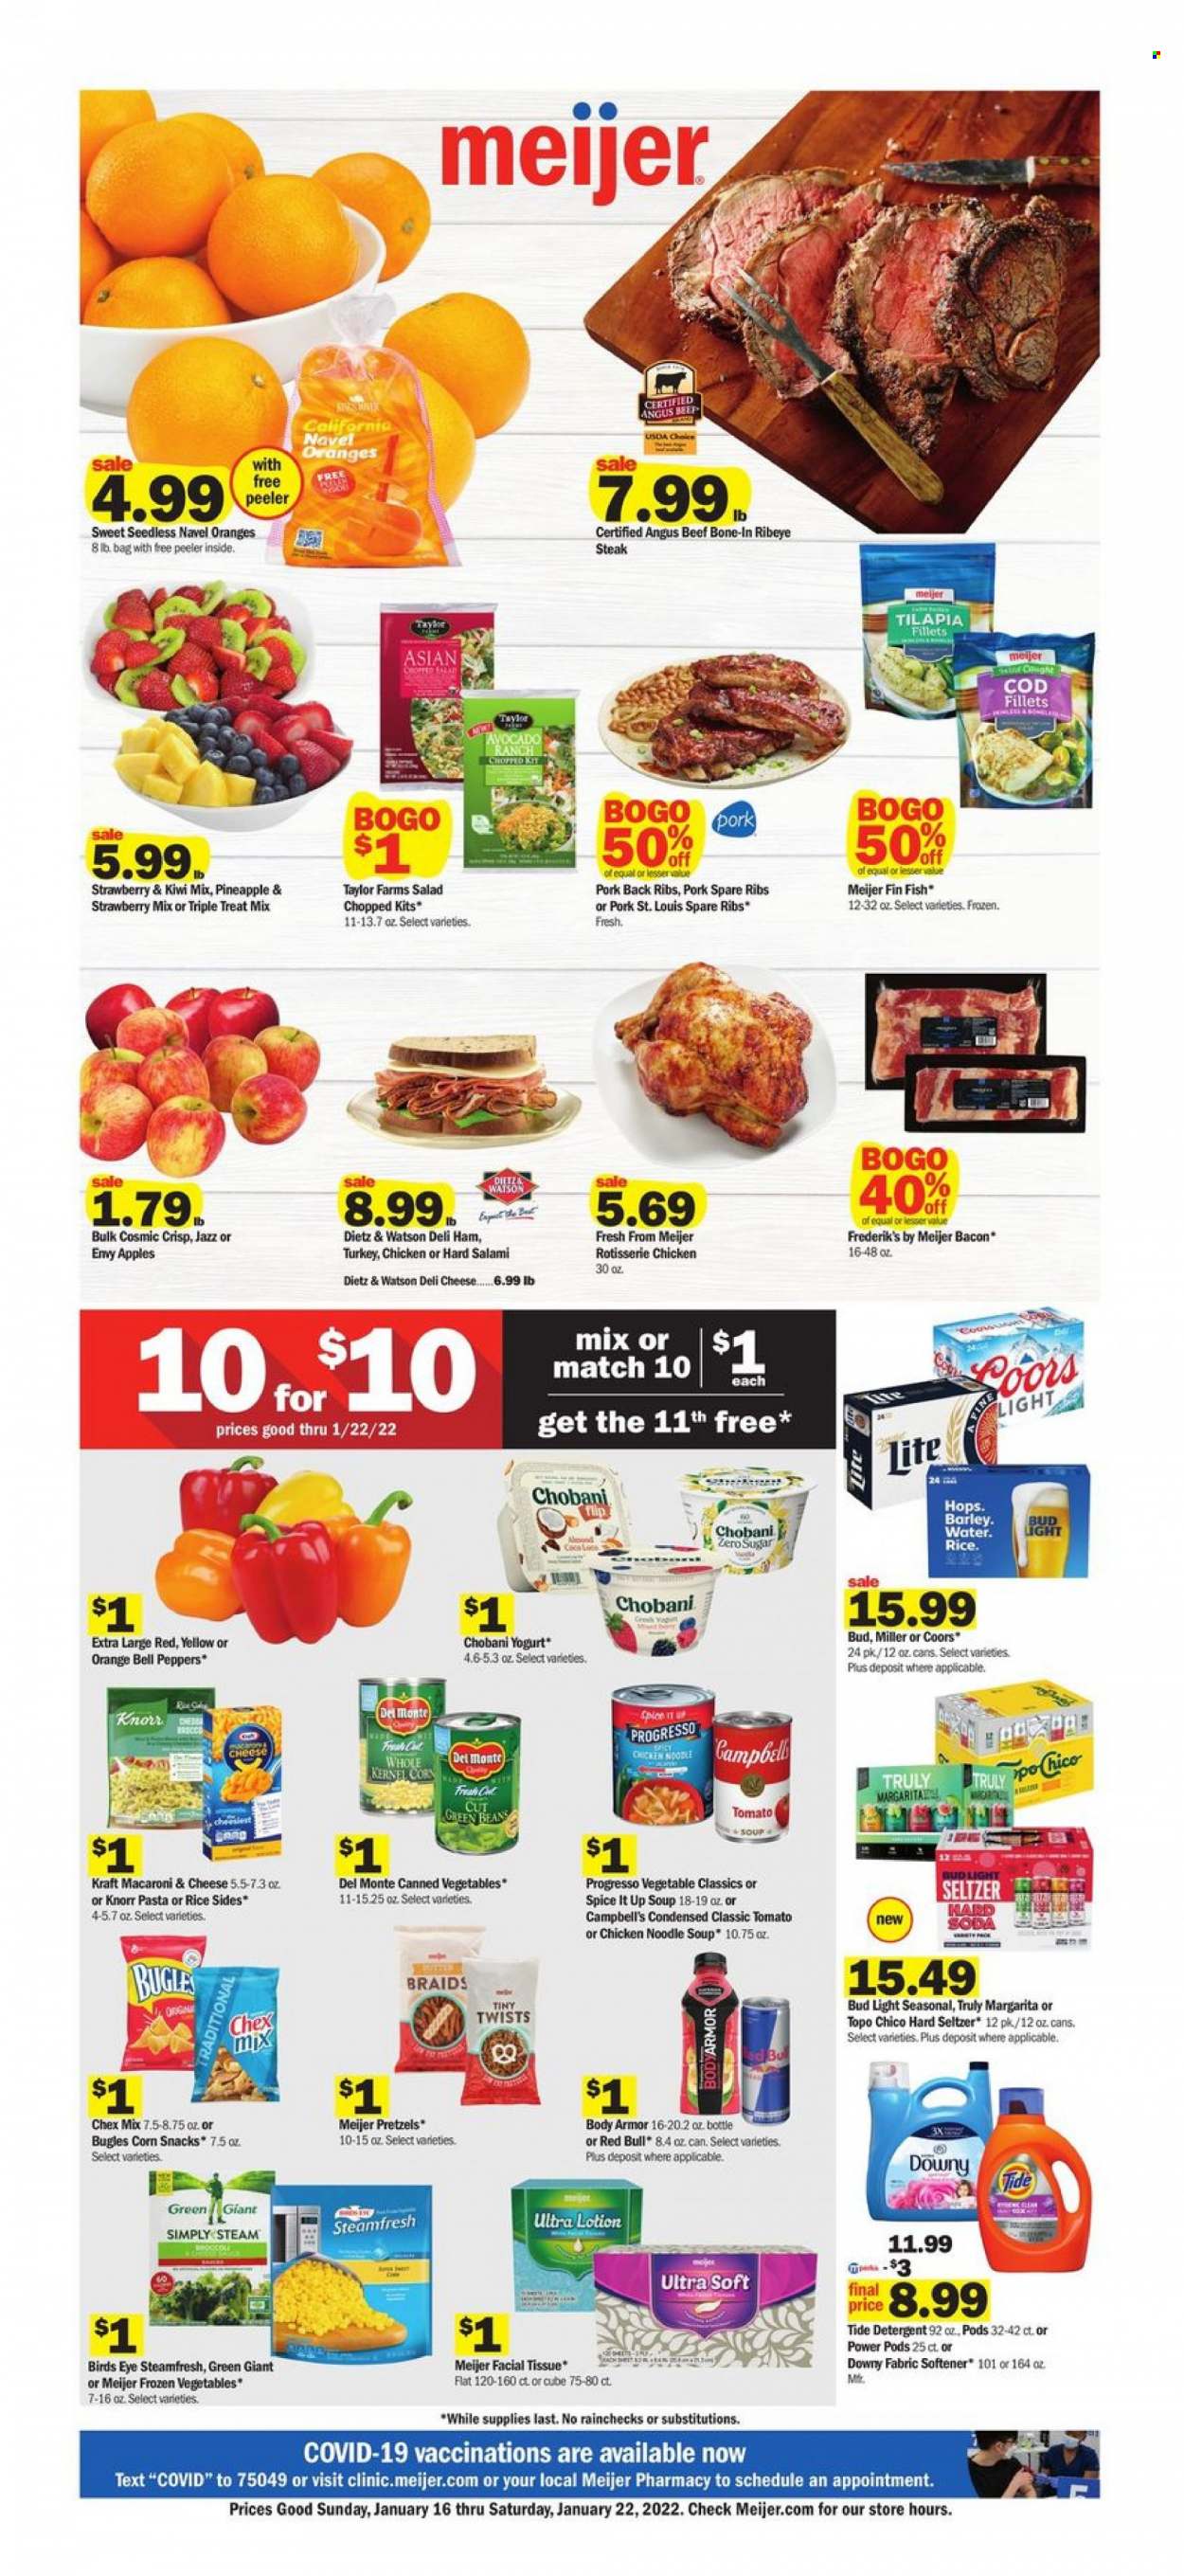 Meijer Flyer - 01/16/2022 - 01/22/2022 - Sales products - pretzels, bell peppers, peppers, apples, avocado, kiwi, orange, cod, tilapia, fish, Campbell's, macaroni & cheese, chicken roast, soup, Knorr, noodles cup, Bird's Eye, noodles, Progresso, Kraft®, bacon, salami, ham, Dietz & Watson, yoghurt, Chobani, frozen vegetables, snack, Chex Mix, canned vegetables, spice, body armor, Red Bull, soda, hard seltzer, TRULY, beer, Bud Light, Miller, beef meat, beef steak, steak, rib eye, bone-in ribeye, ribeye steak, pork meat, pork ribs, pork spare ribs, pork back ribs, tissues, detergent, Tide, fabric softener, Downy laundry, body lotion, peeler, beef bone, Coors, navel oranges. Page 1.